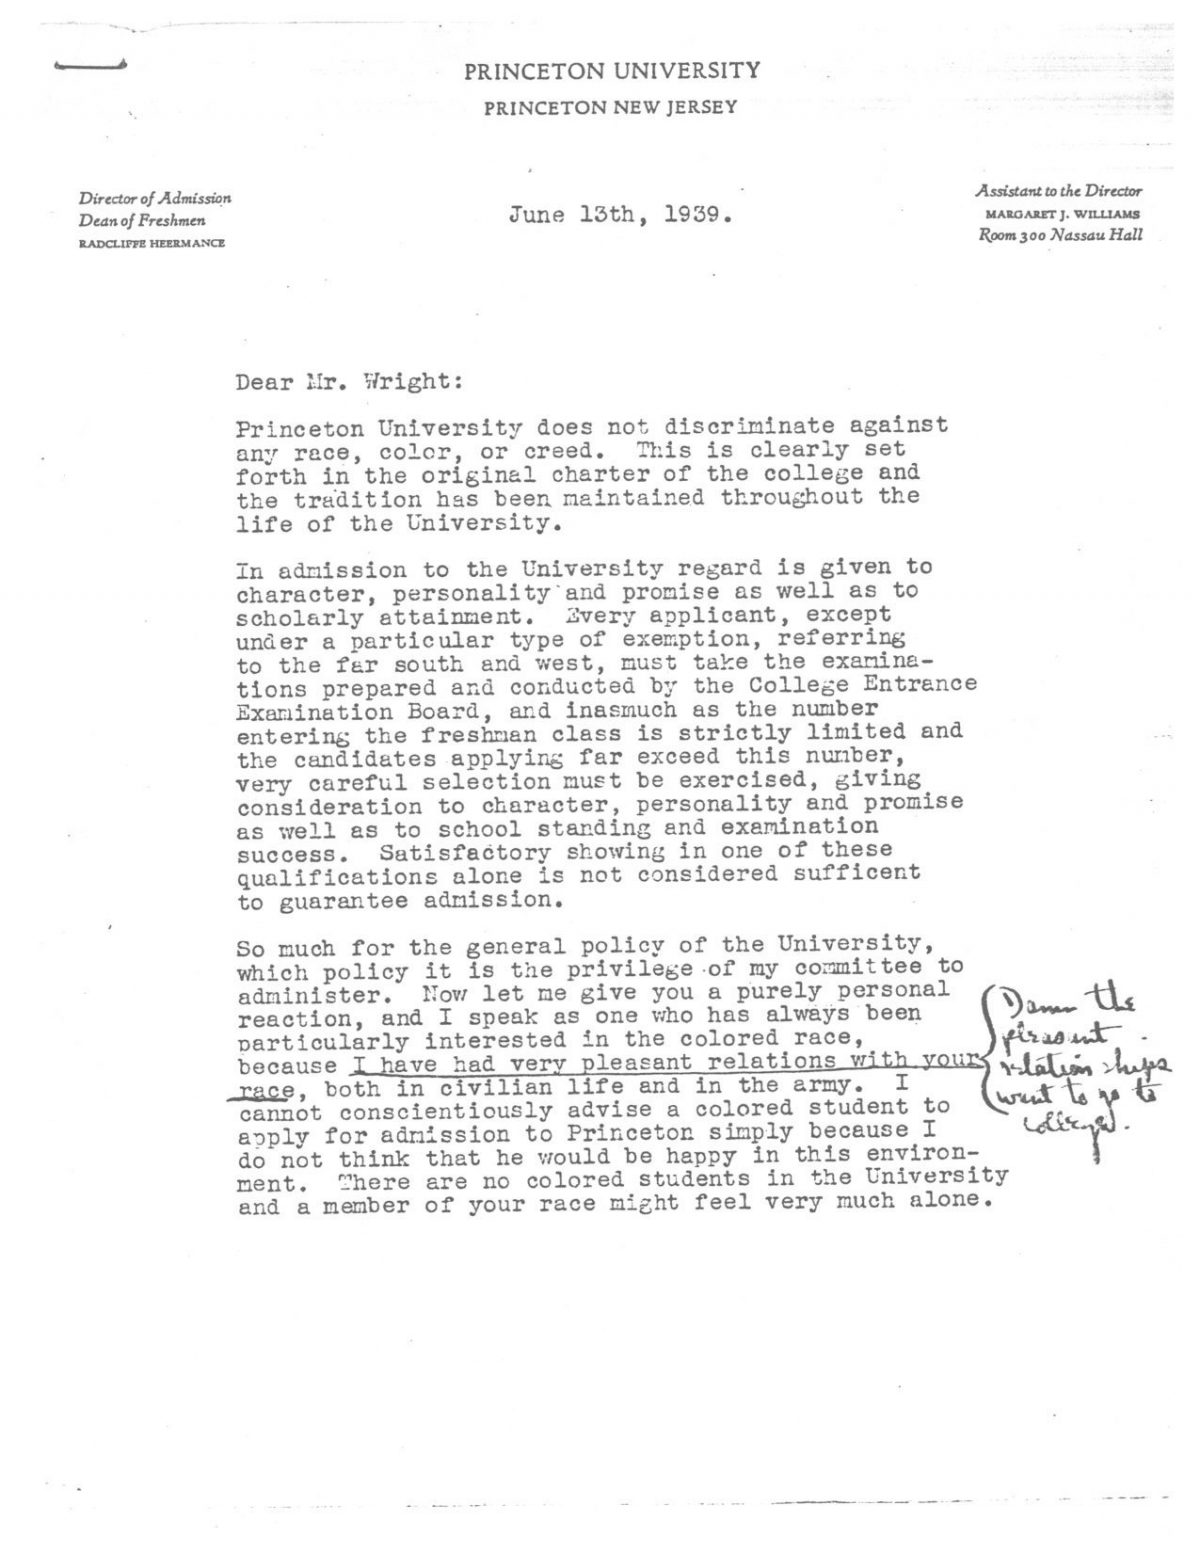 Letter from Radcliffe Heermance to Bruce Wright